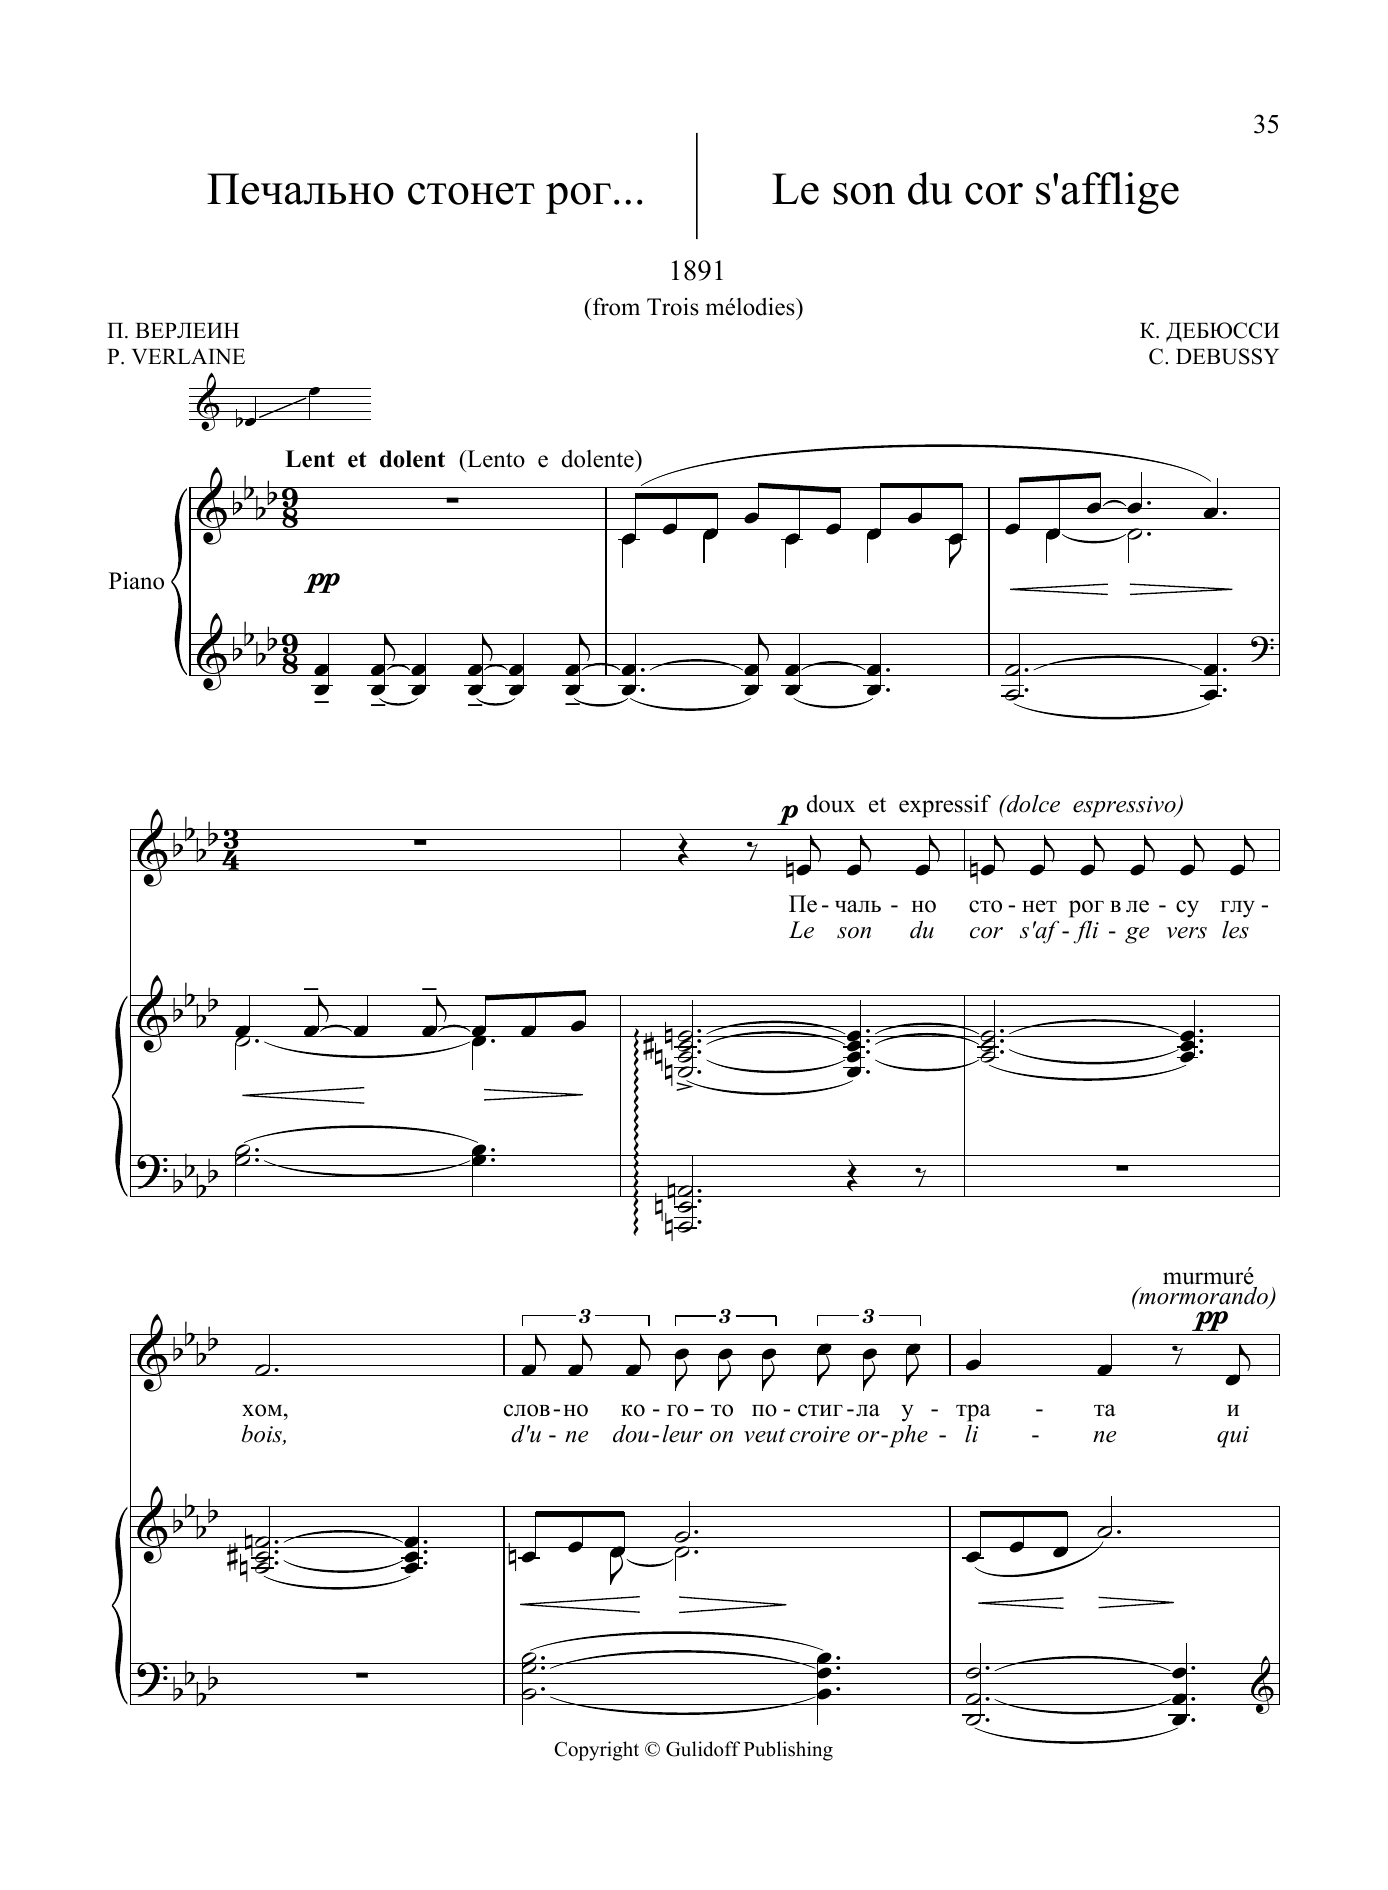 Claude Debussy 20 Songs Vol. 2: Le son du cor s'afflige from Trois mélodies sheet music notes and chords arranged for Piano & Vocal